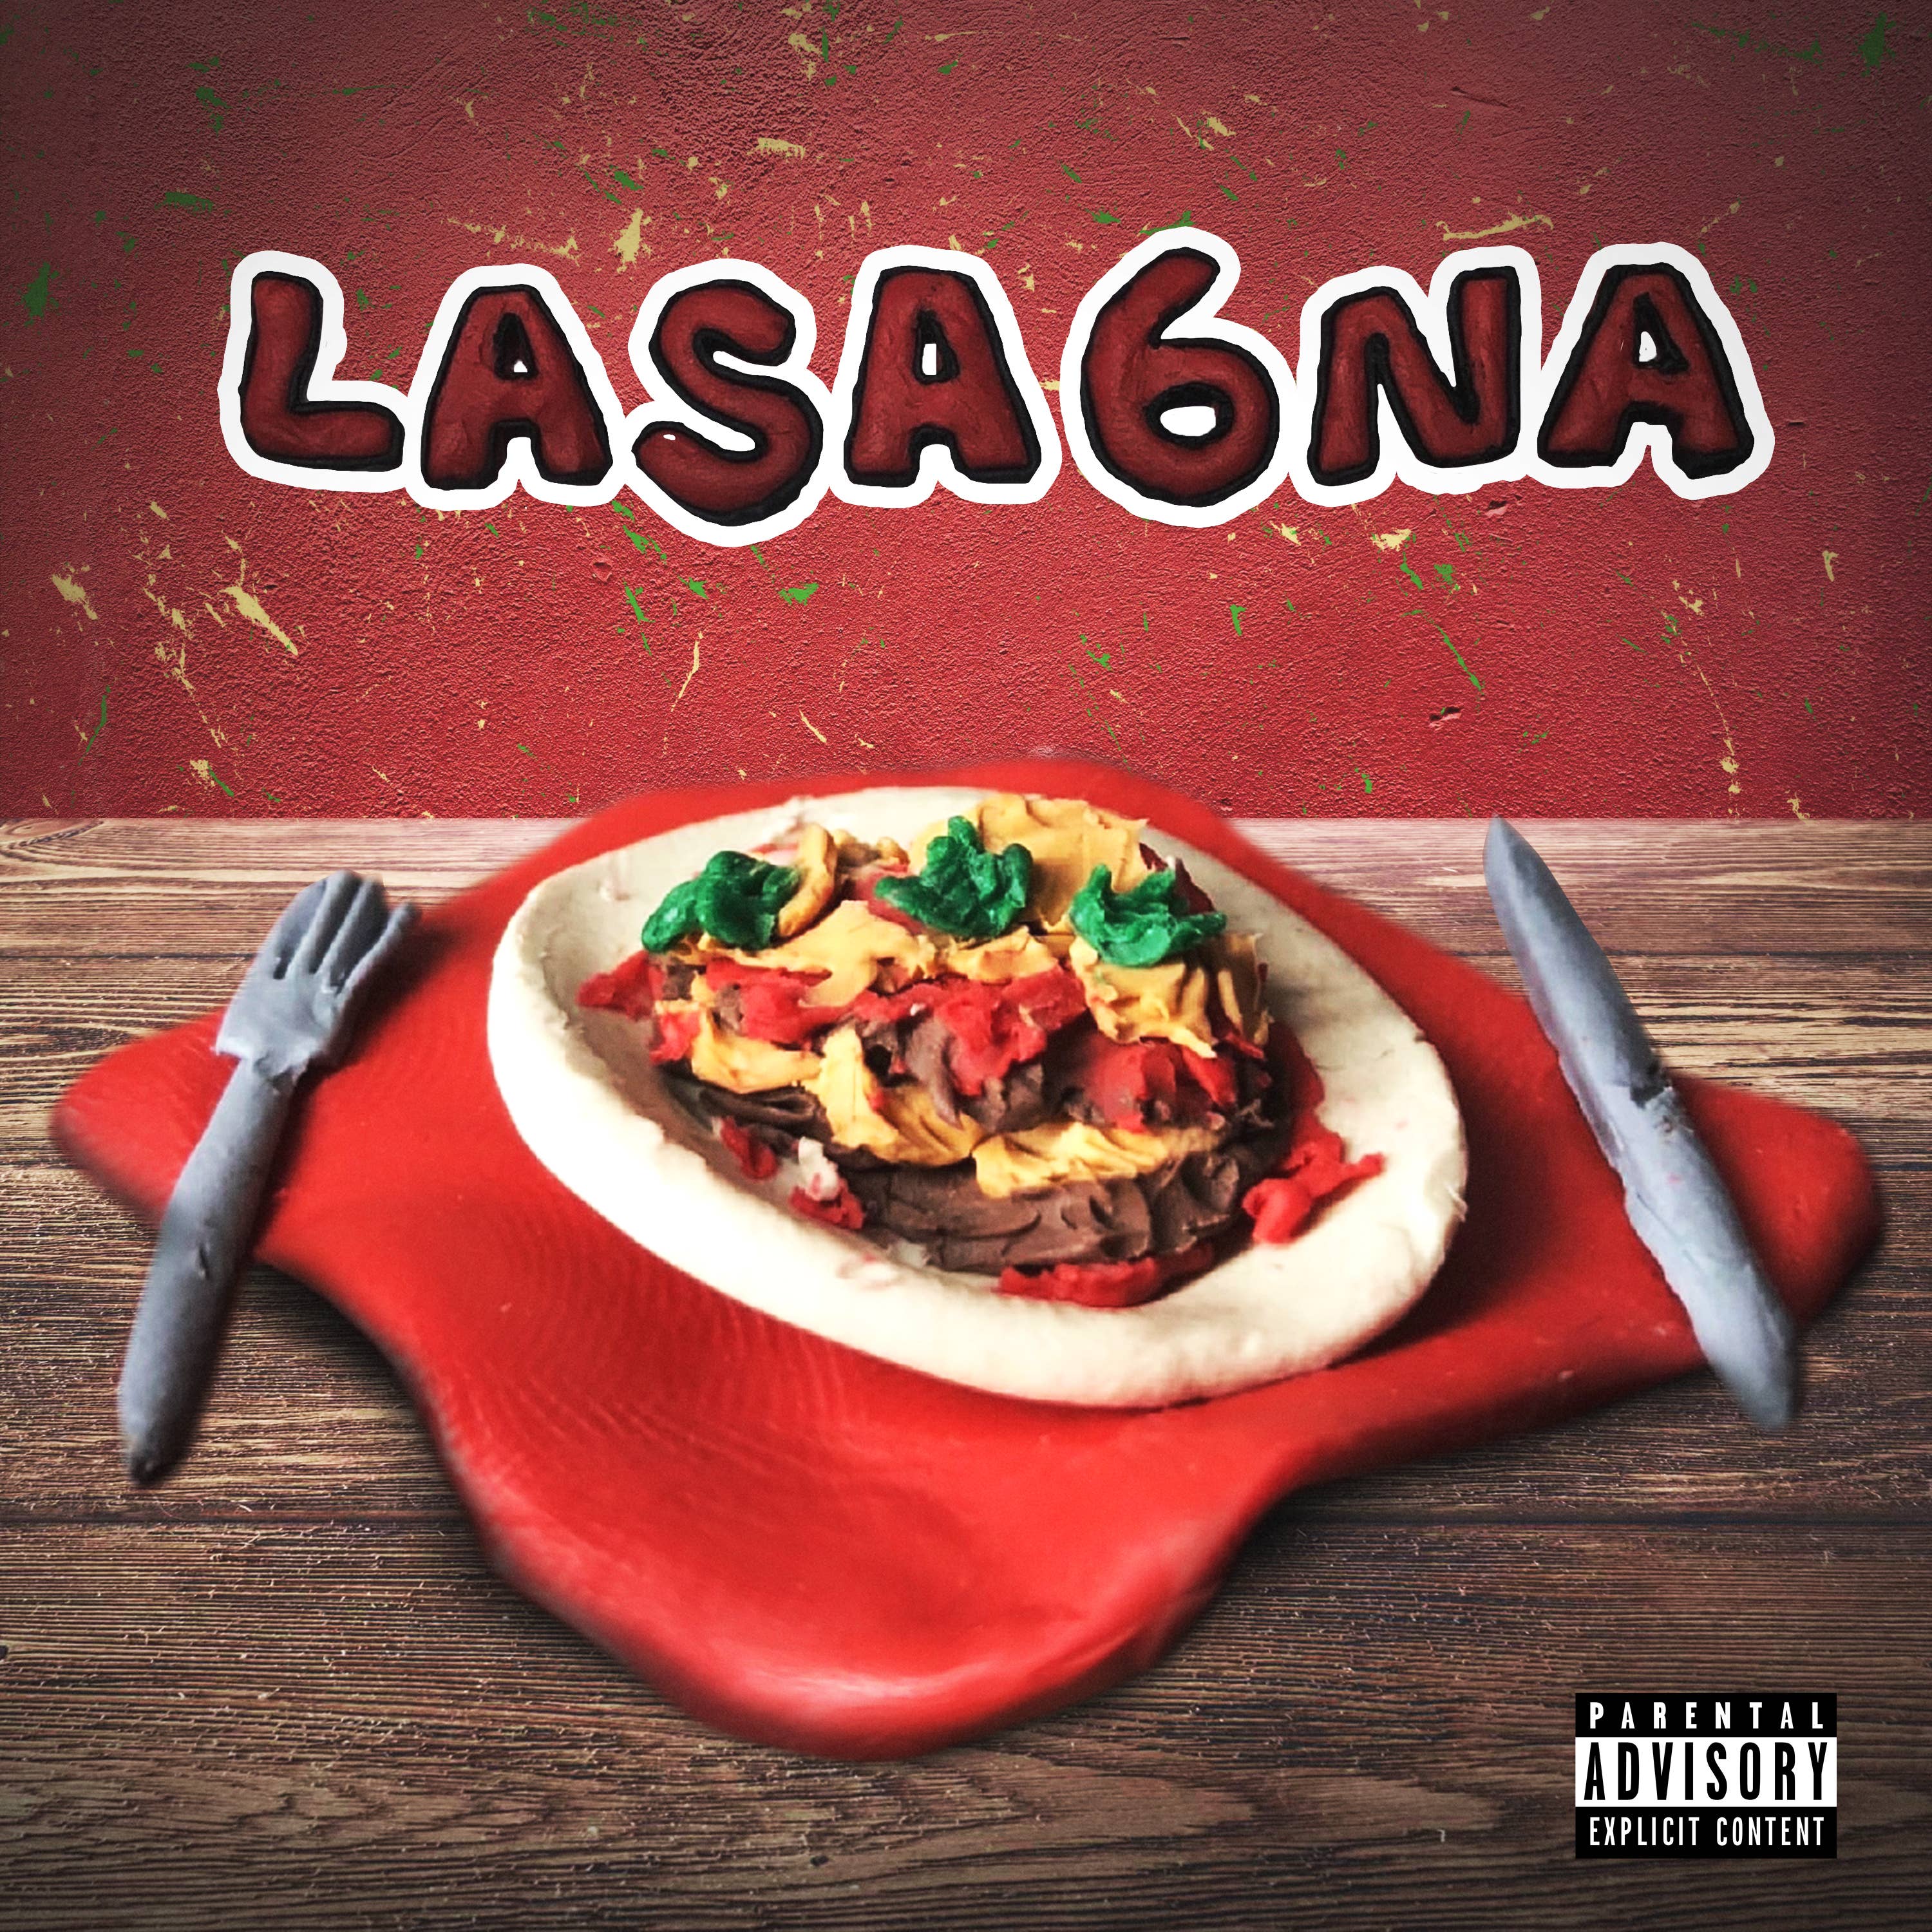 The cover art for the Hous3 of Commons EP, 'LASA6NA'